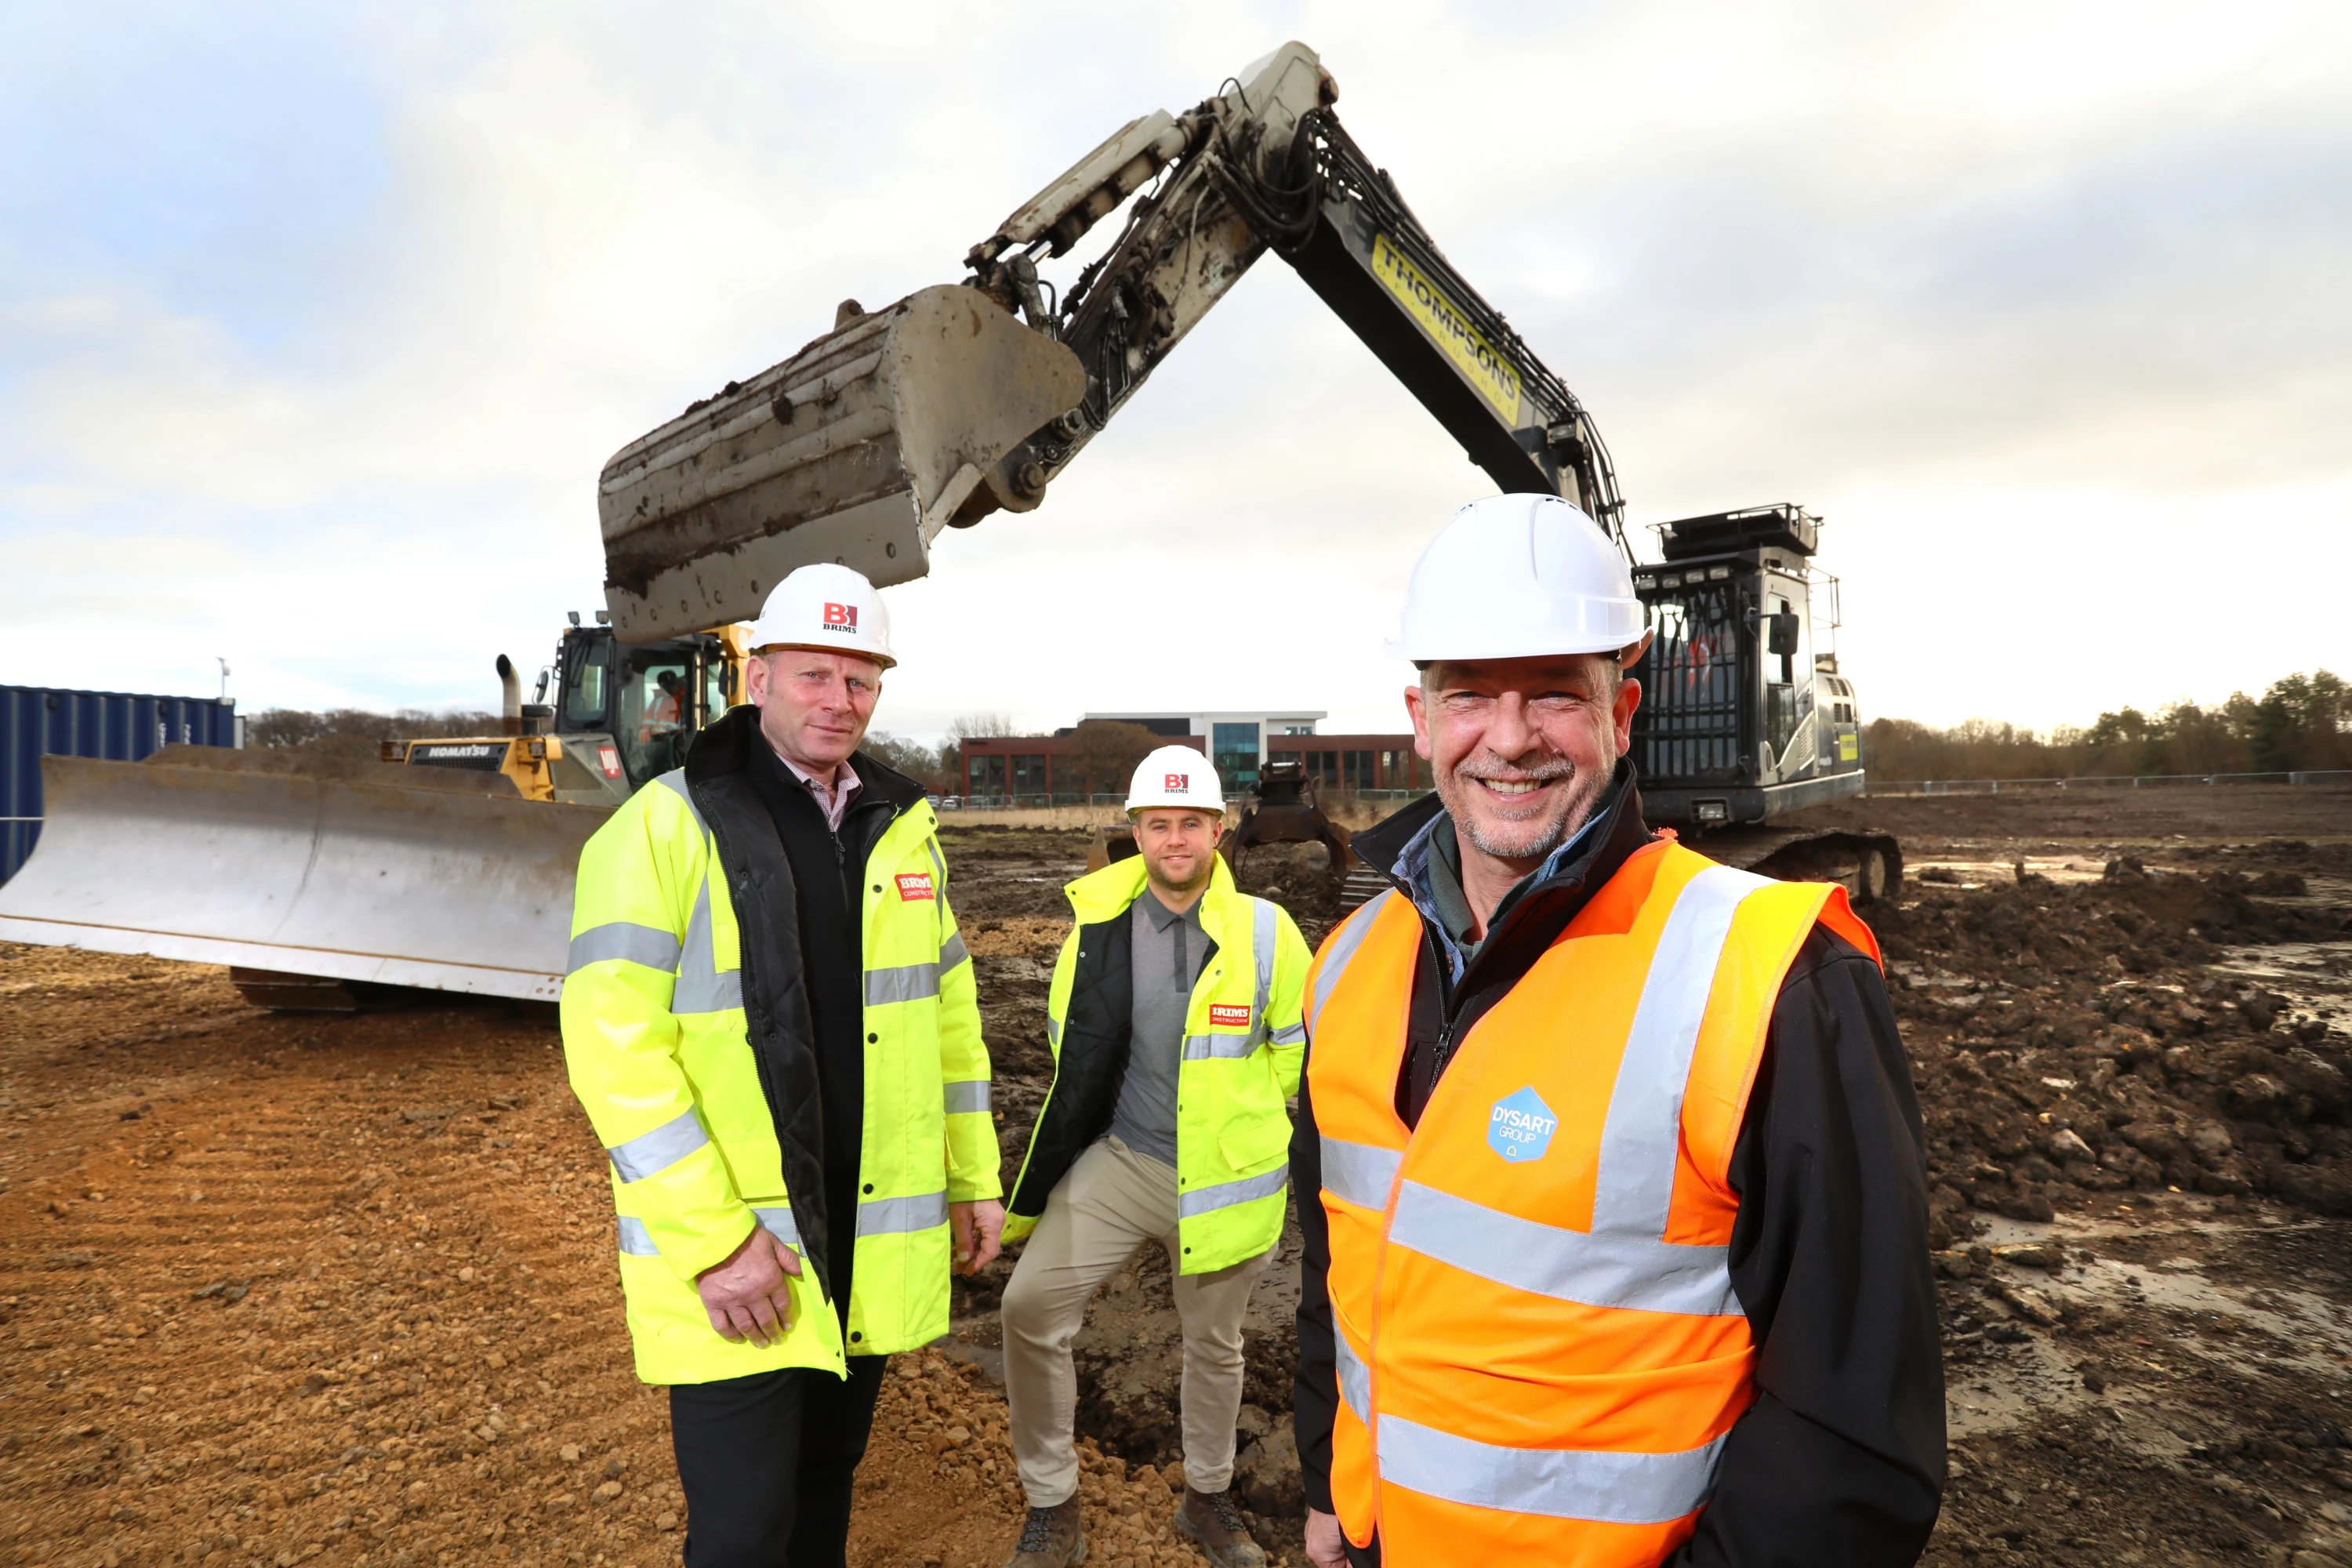 Mike Clark (front) of Tynexe Commercial, developers of AirView Park, with Peter Reek, Project Manager (right), and David Tait, Site Manager (centre), both of Brims Construction.